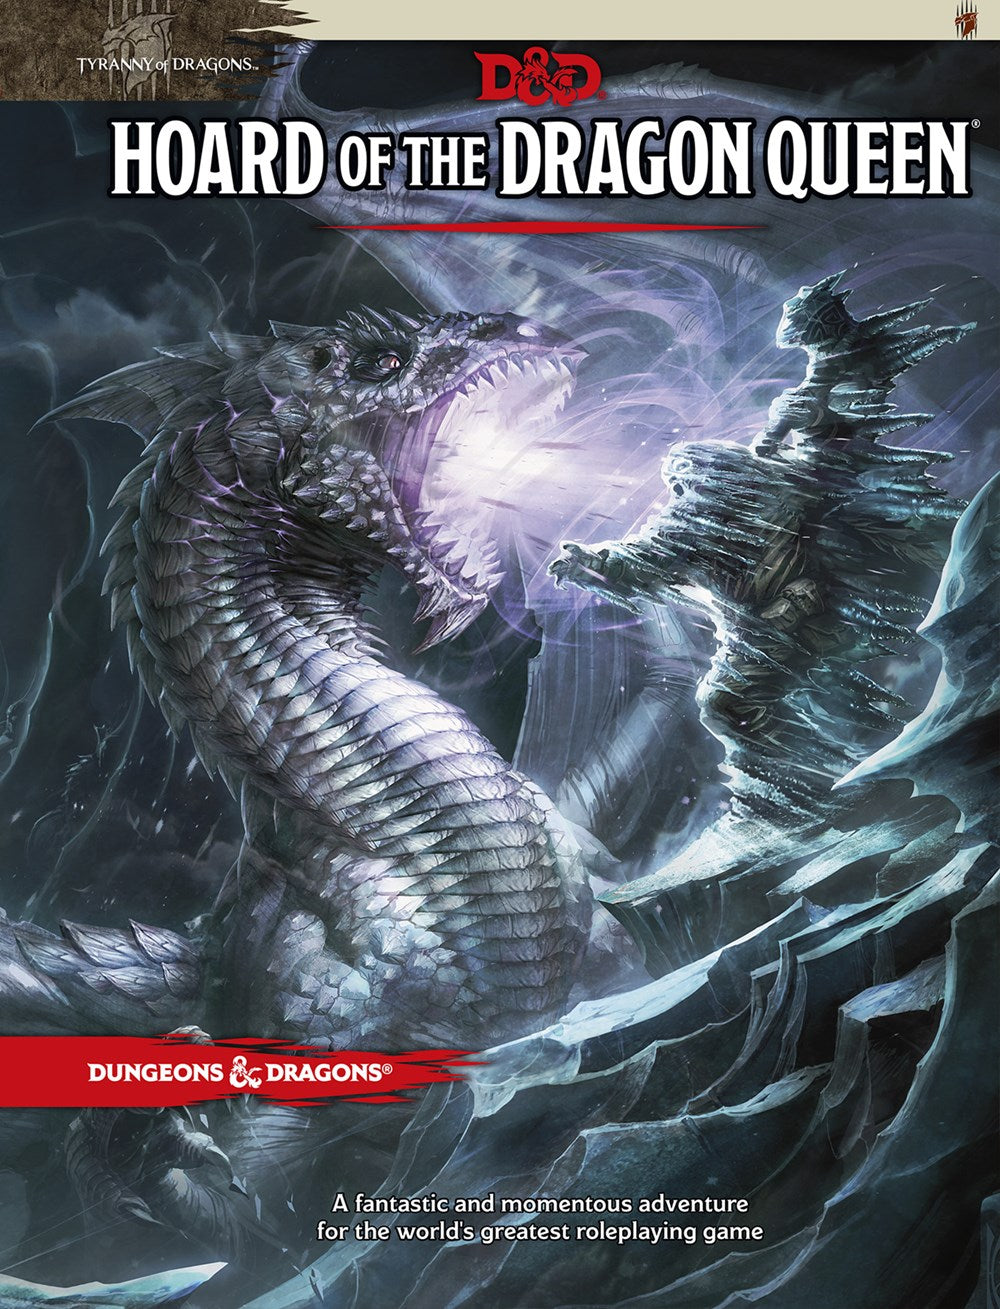 Princes of the Apocalypse (Dungeons & Dragons): Dungeons & Dragons:  9780786965786: : Books